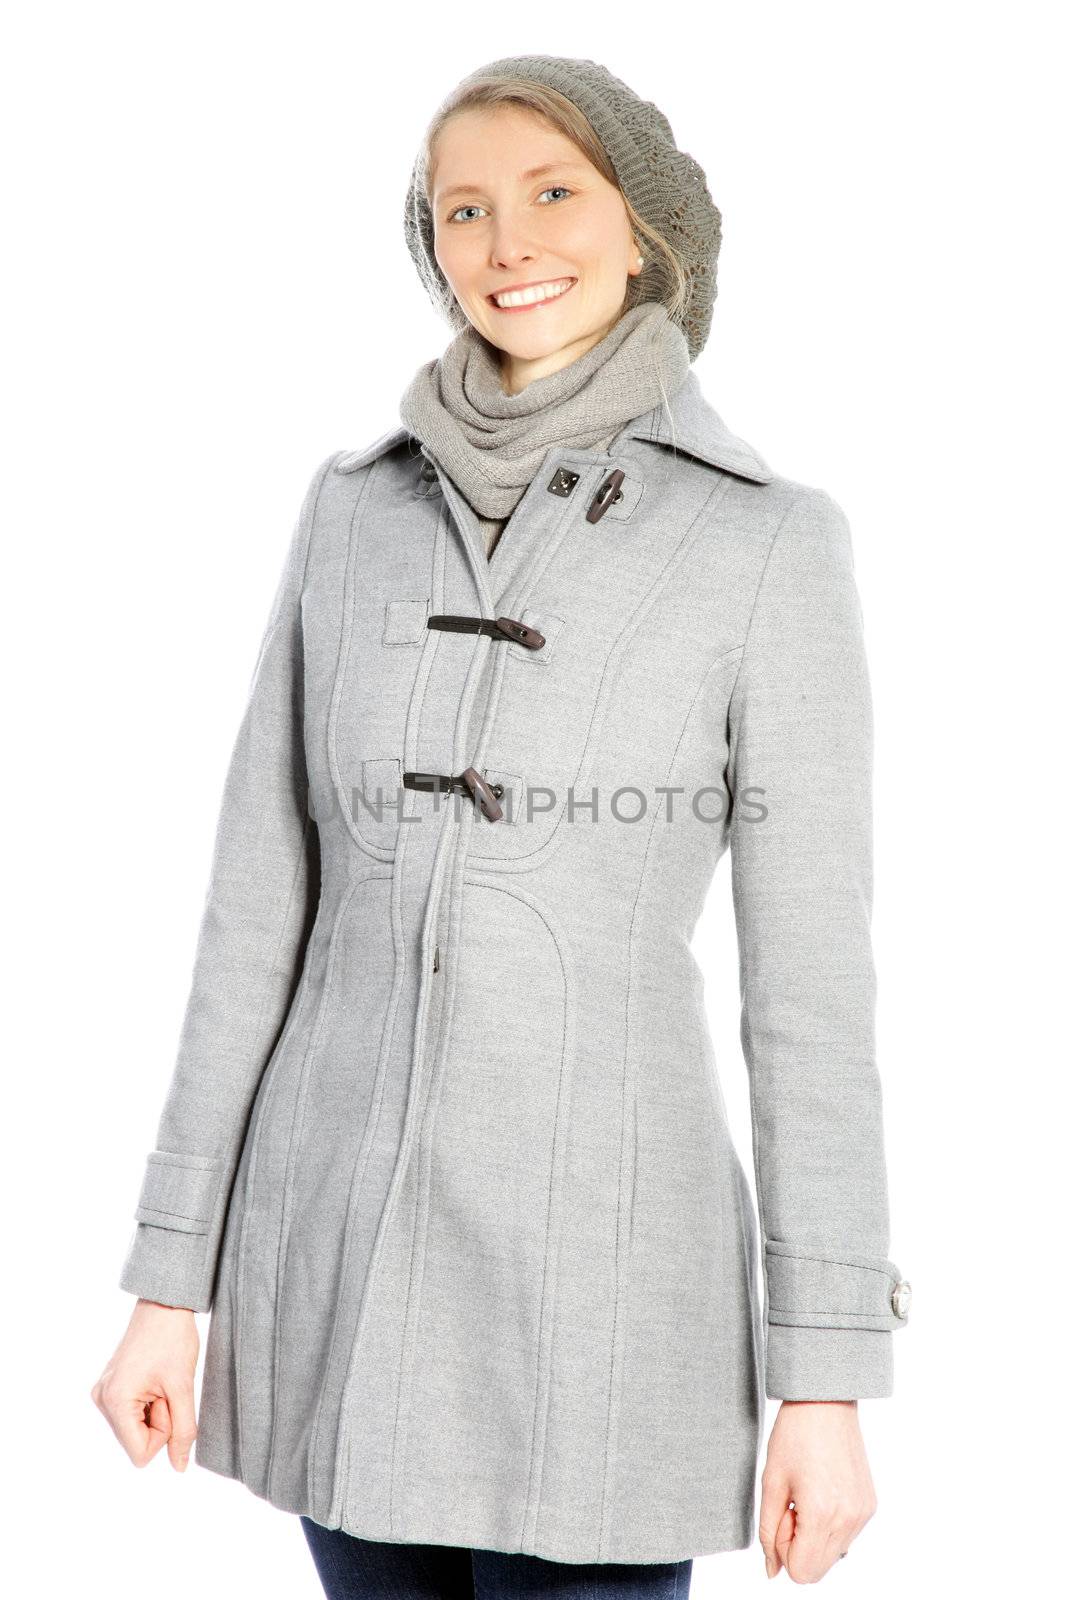 Young attractive woman wearing a grey coat and hat smiling at the camera.